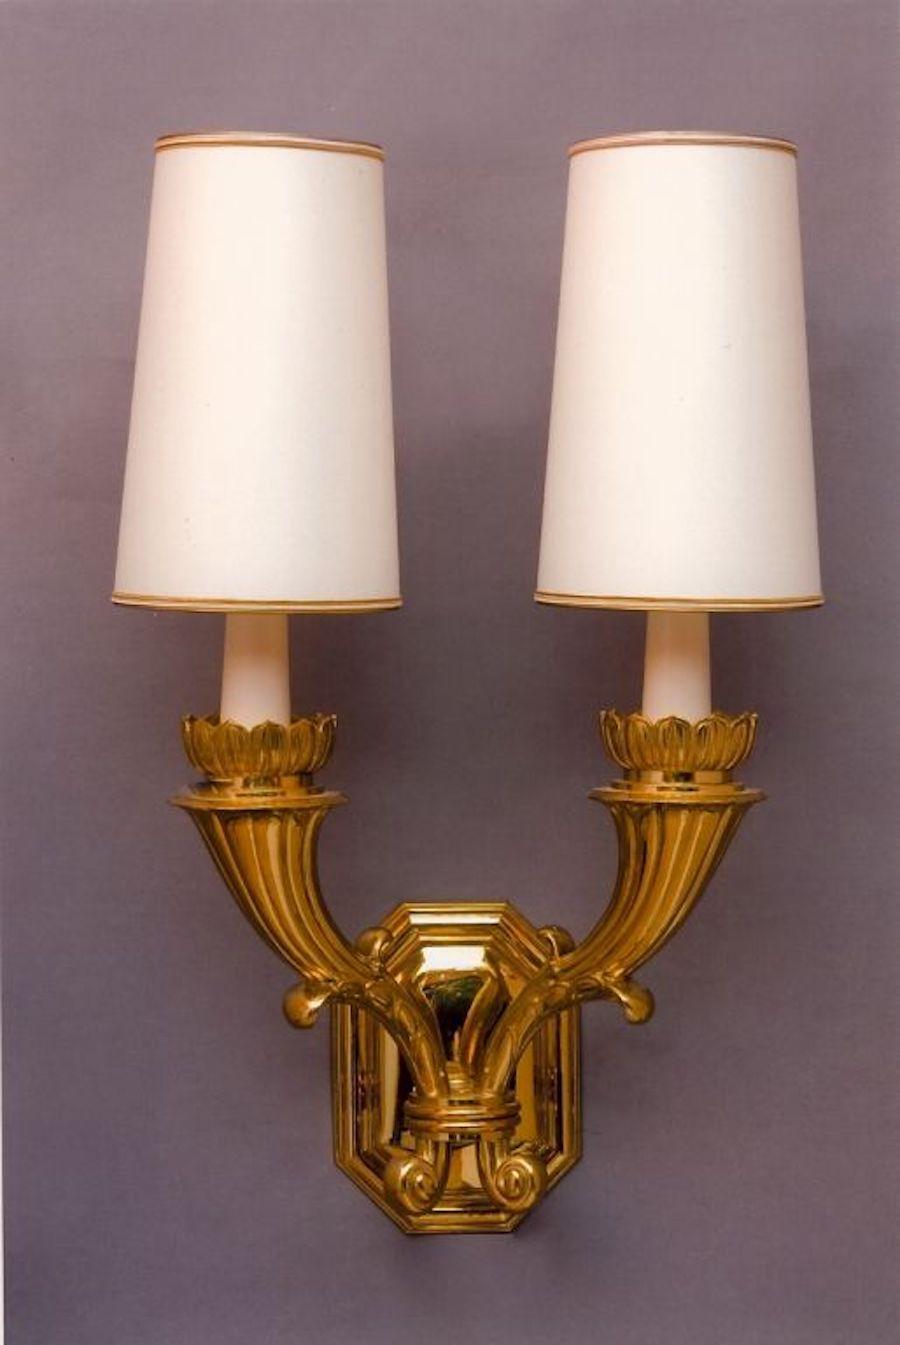 Mid-20th Century Magnificent Pair of Italian Neoclassical Sconces For Sale